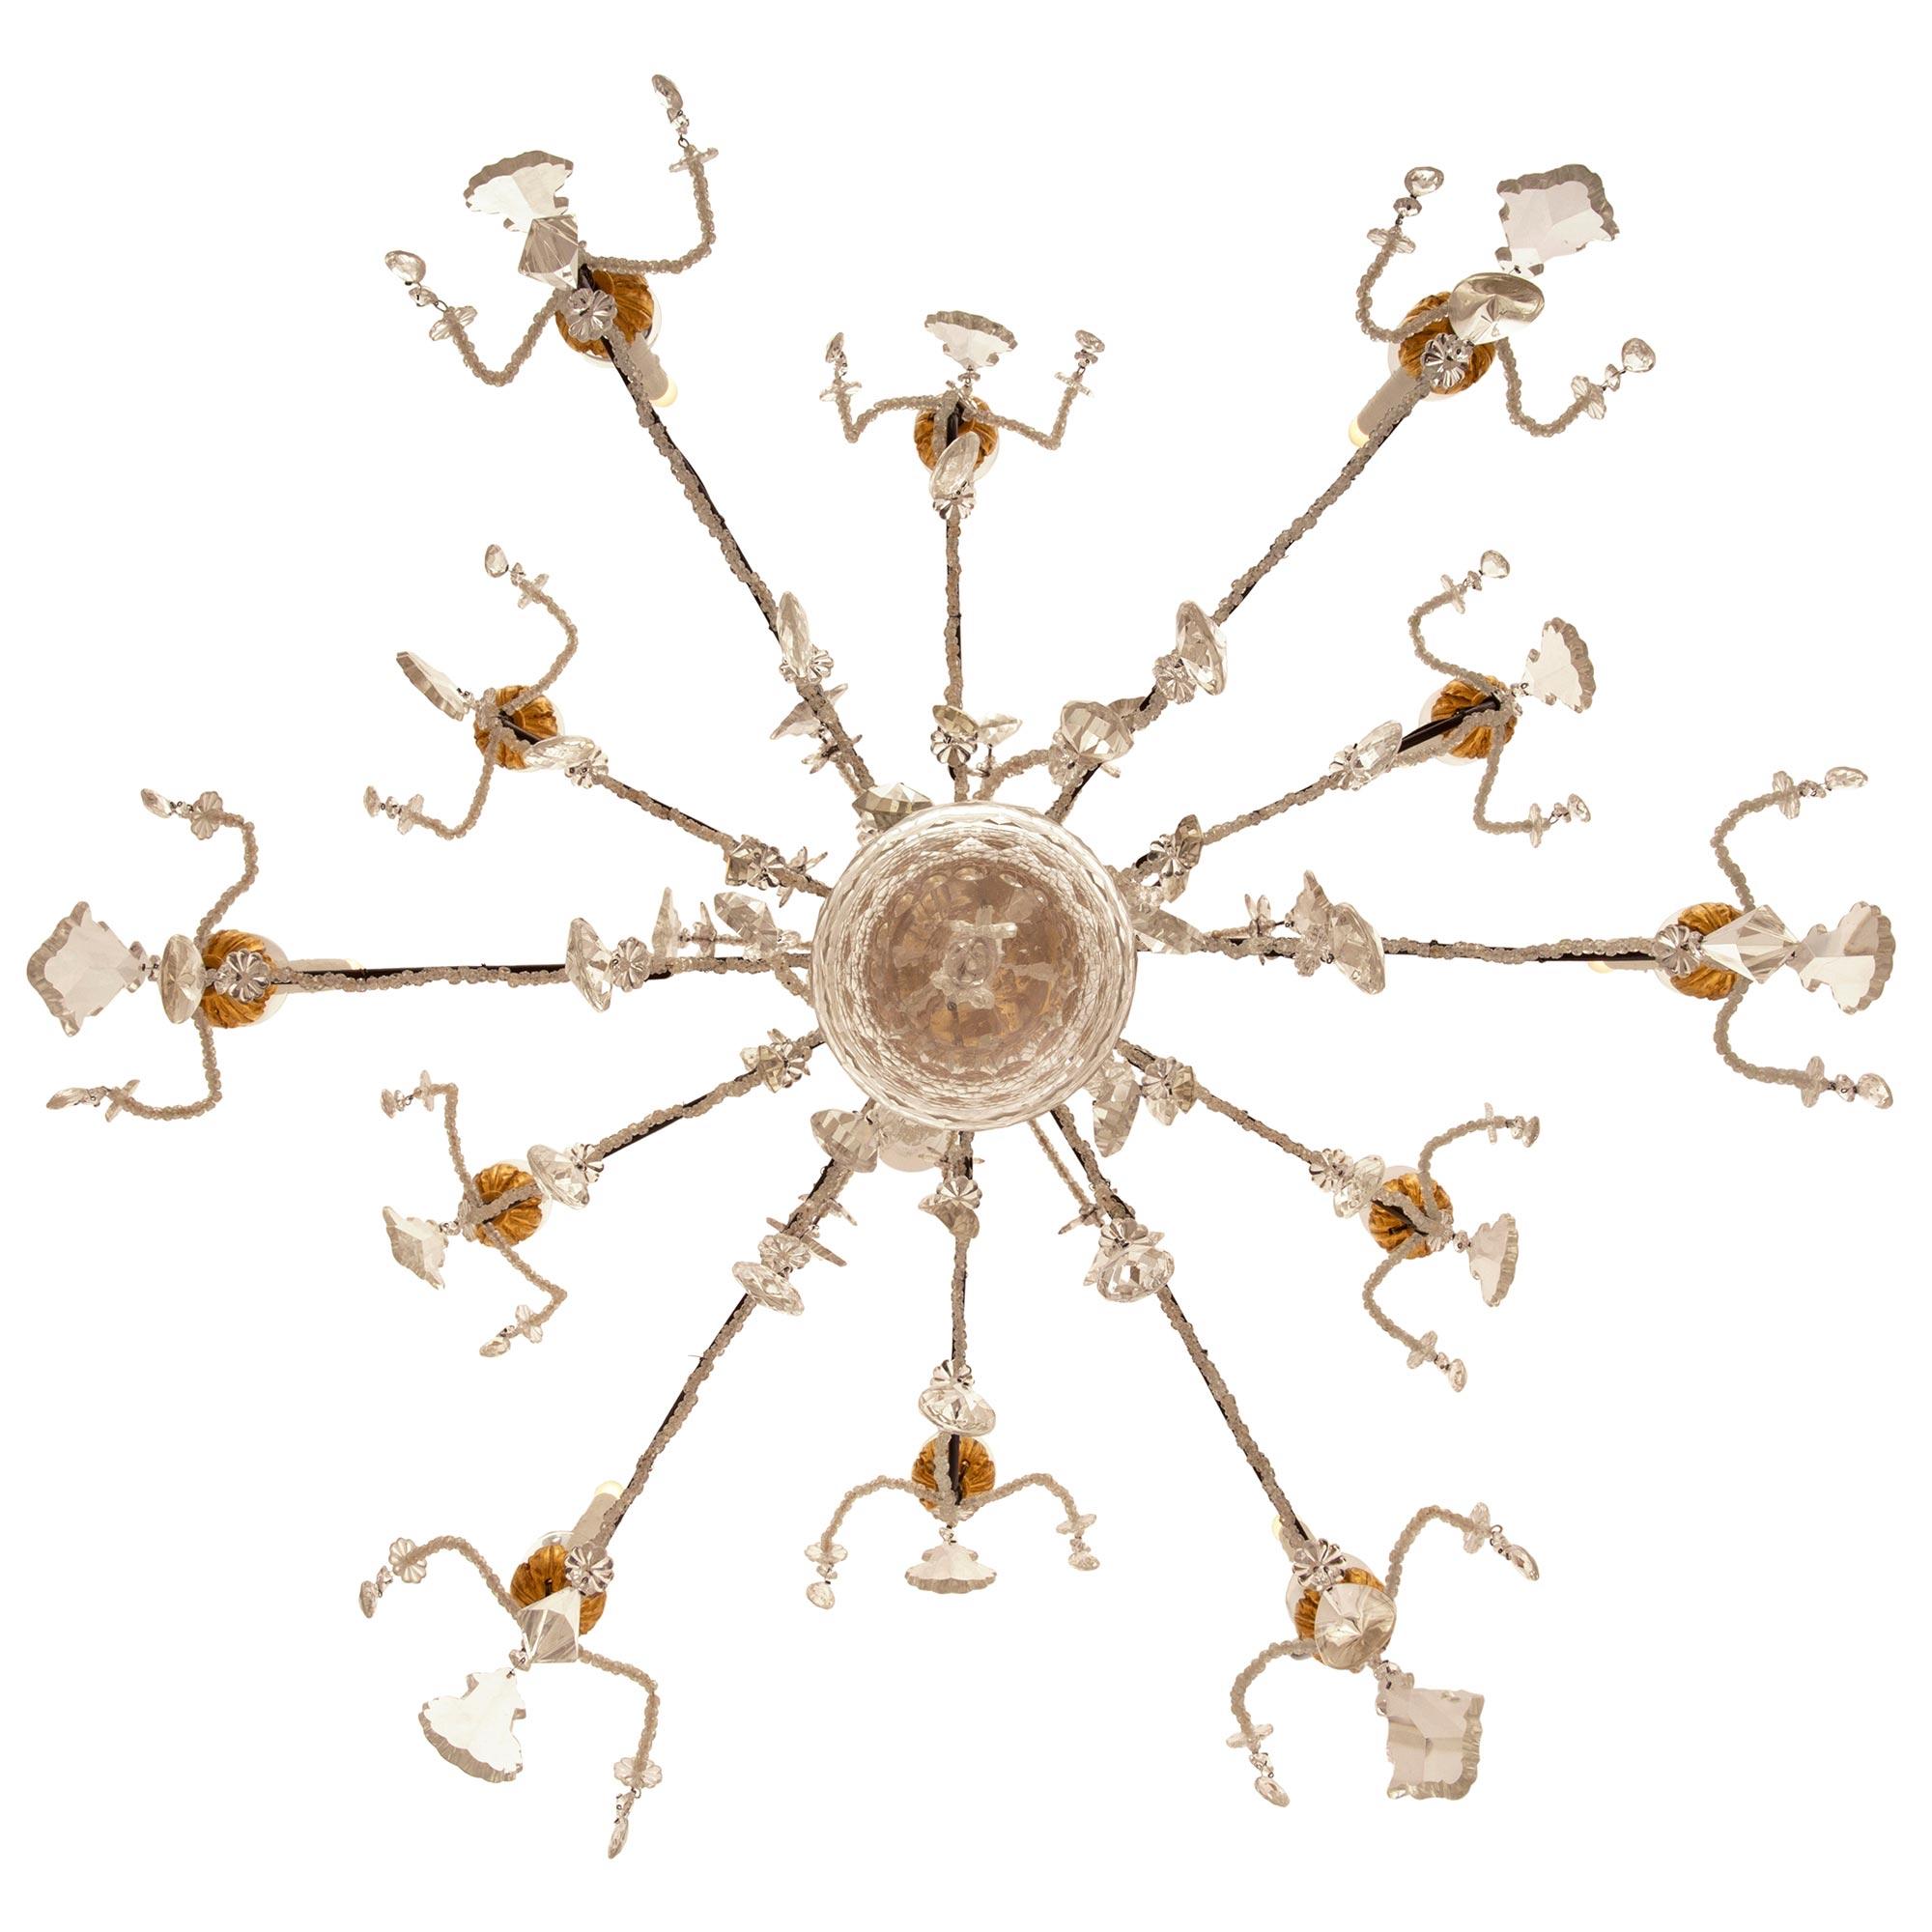 A stunning and extremely decorative Italian mid 19th century Genovese st. giltwood, wrought iron, and crystal chandelier. The twelve arm chandelier is centered by a beautiful bottom crystal ball with a lovely honeycomb like design below fine cut